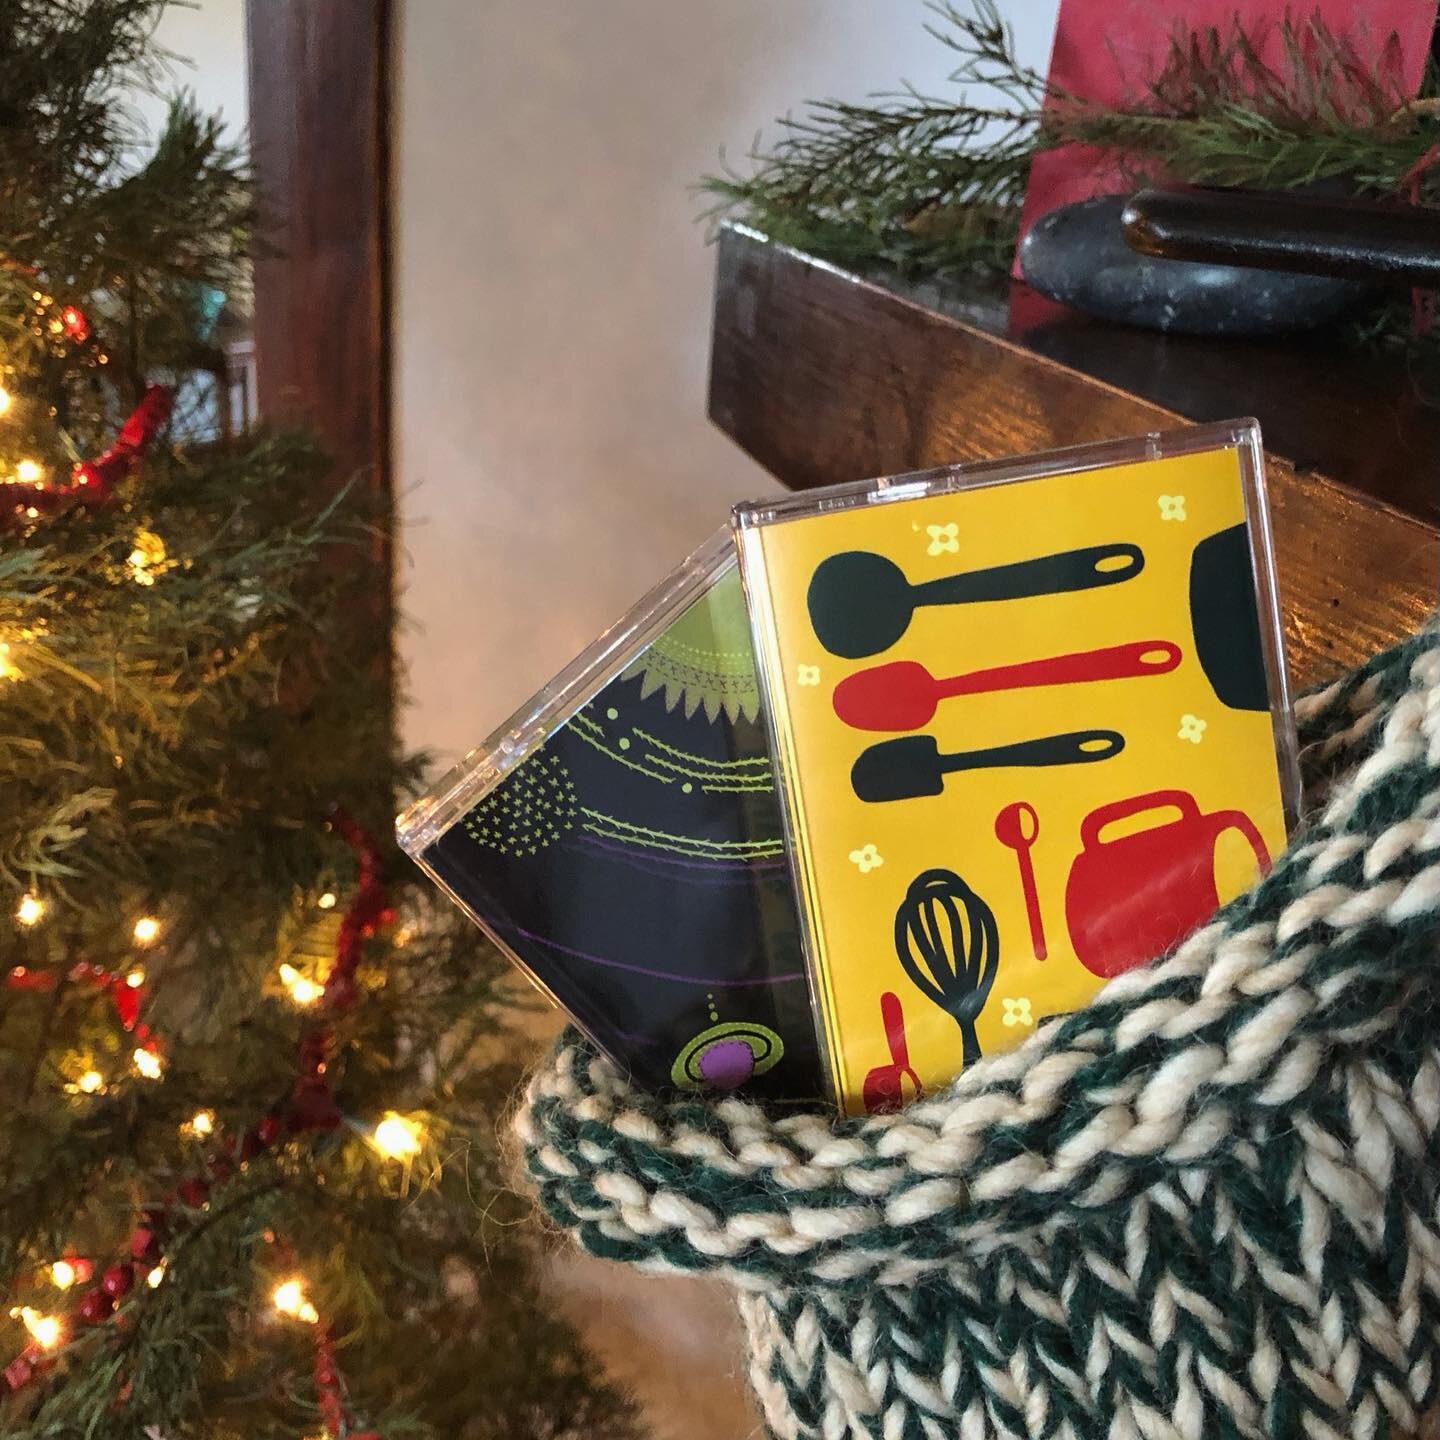 Psst! In case you were wondering, MEASURE, POUR &amp; MIXTAPE fits perfectly in a stocking, and could be paired with our other compilation QUILT OF THE UNIVERSE or one of our other cassettes for a far-out holiday gift for the tapeheads in your life.